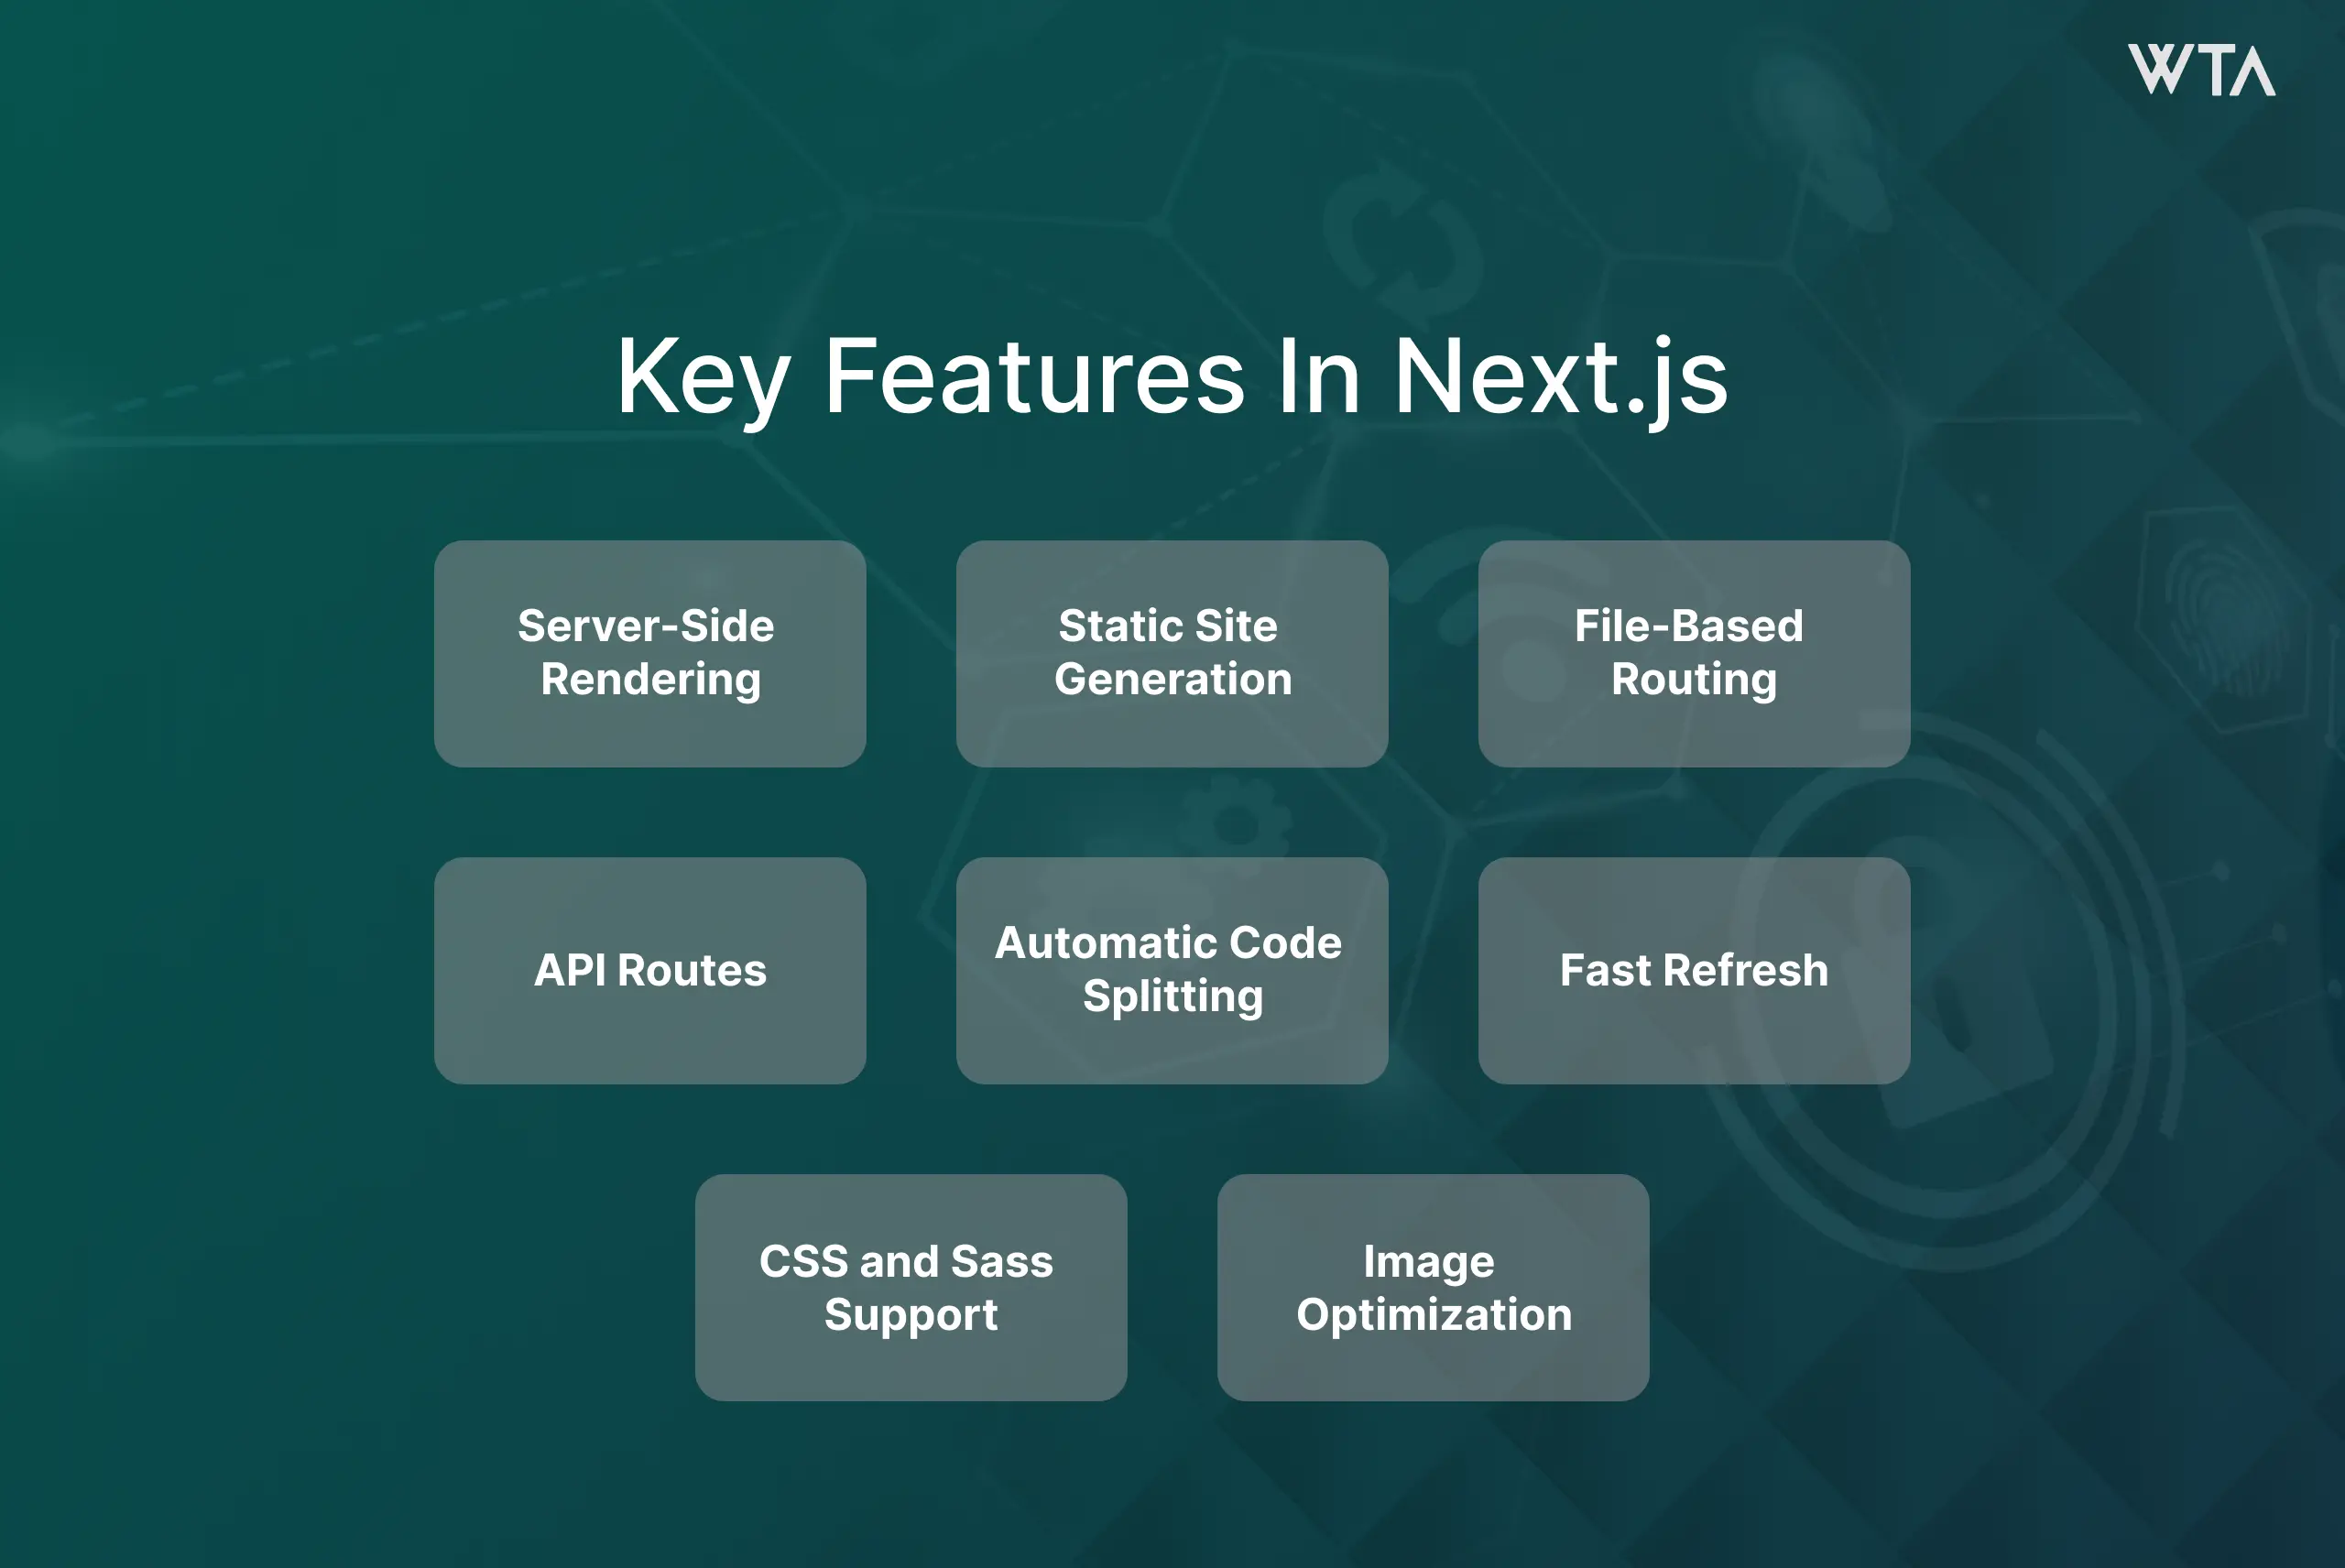 Key Features in Next js